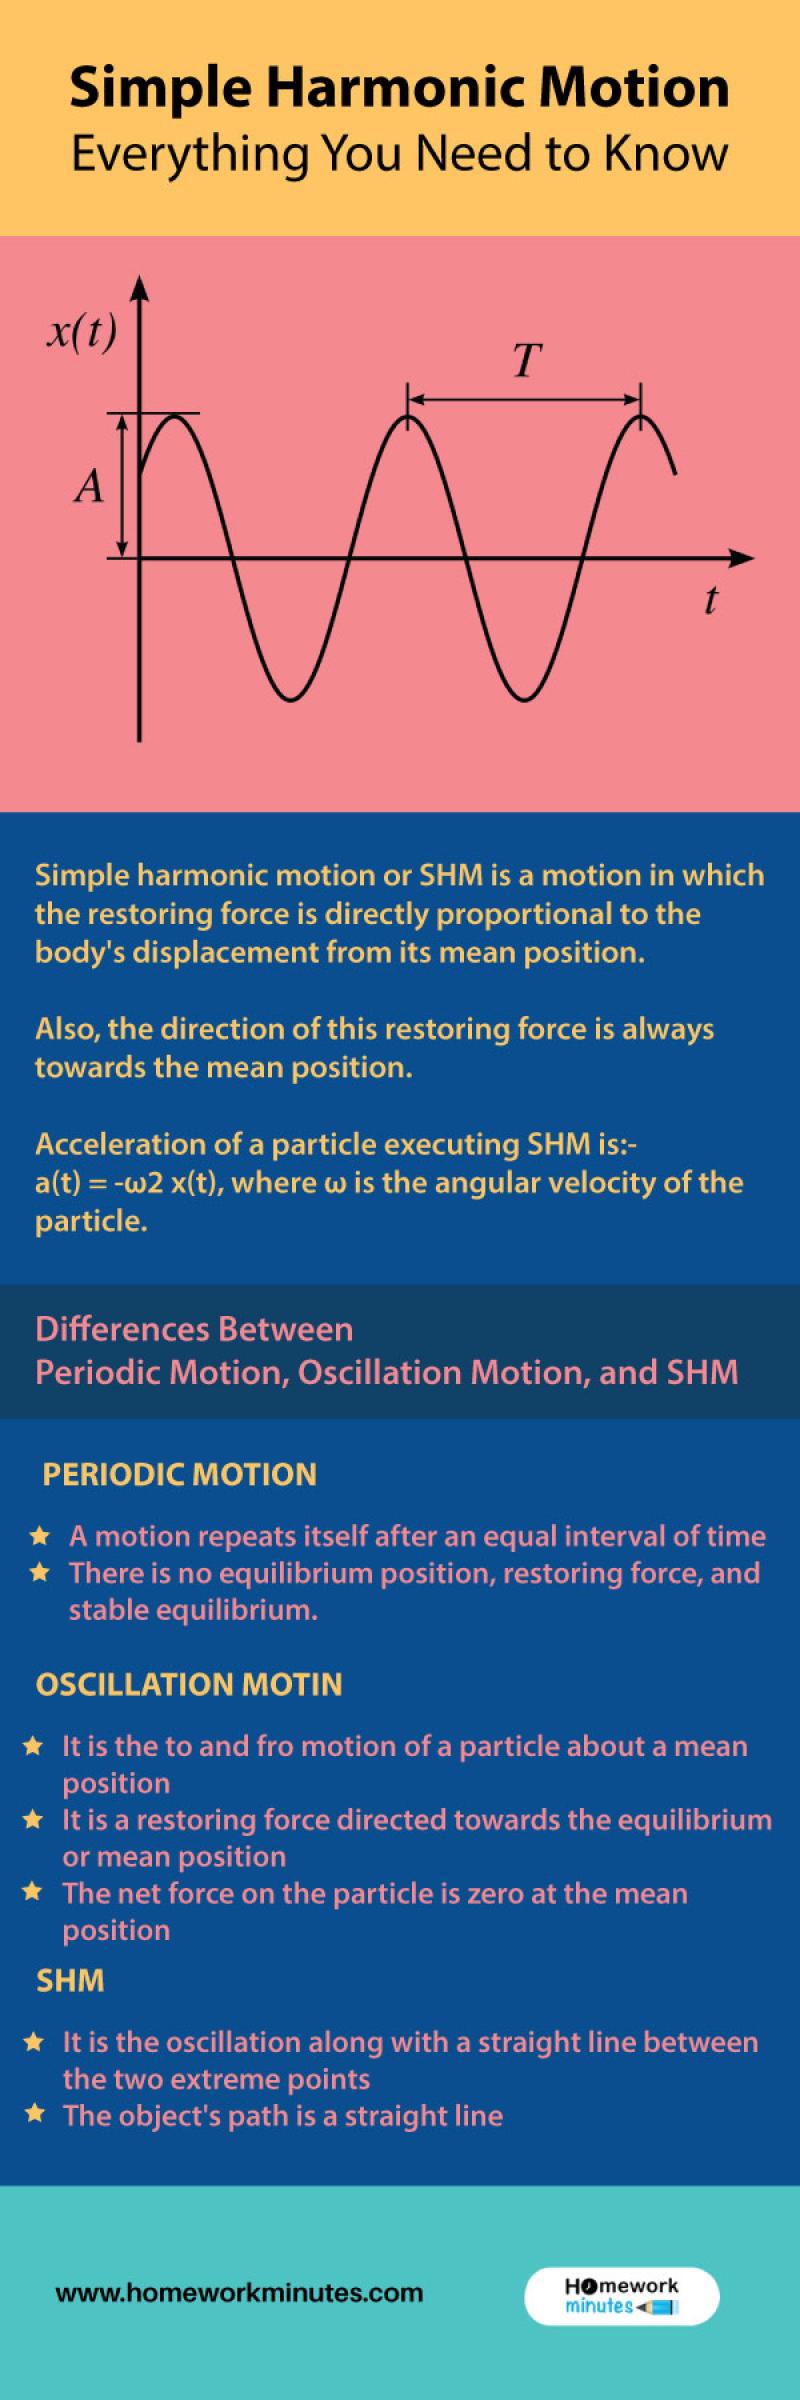 Importance of Simple Harmonic Motion: Practical Significance